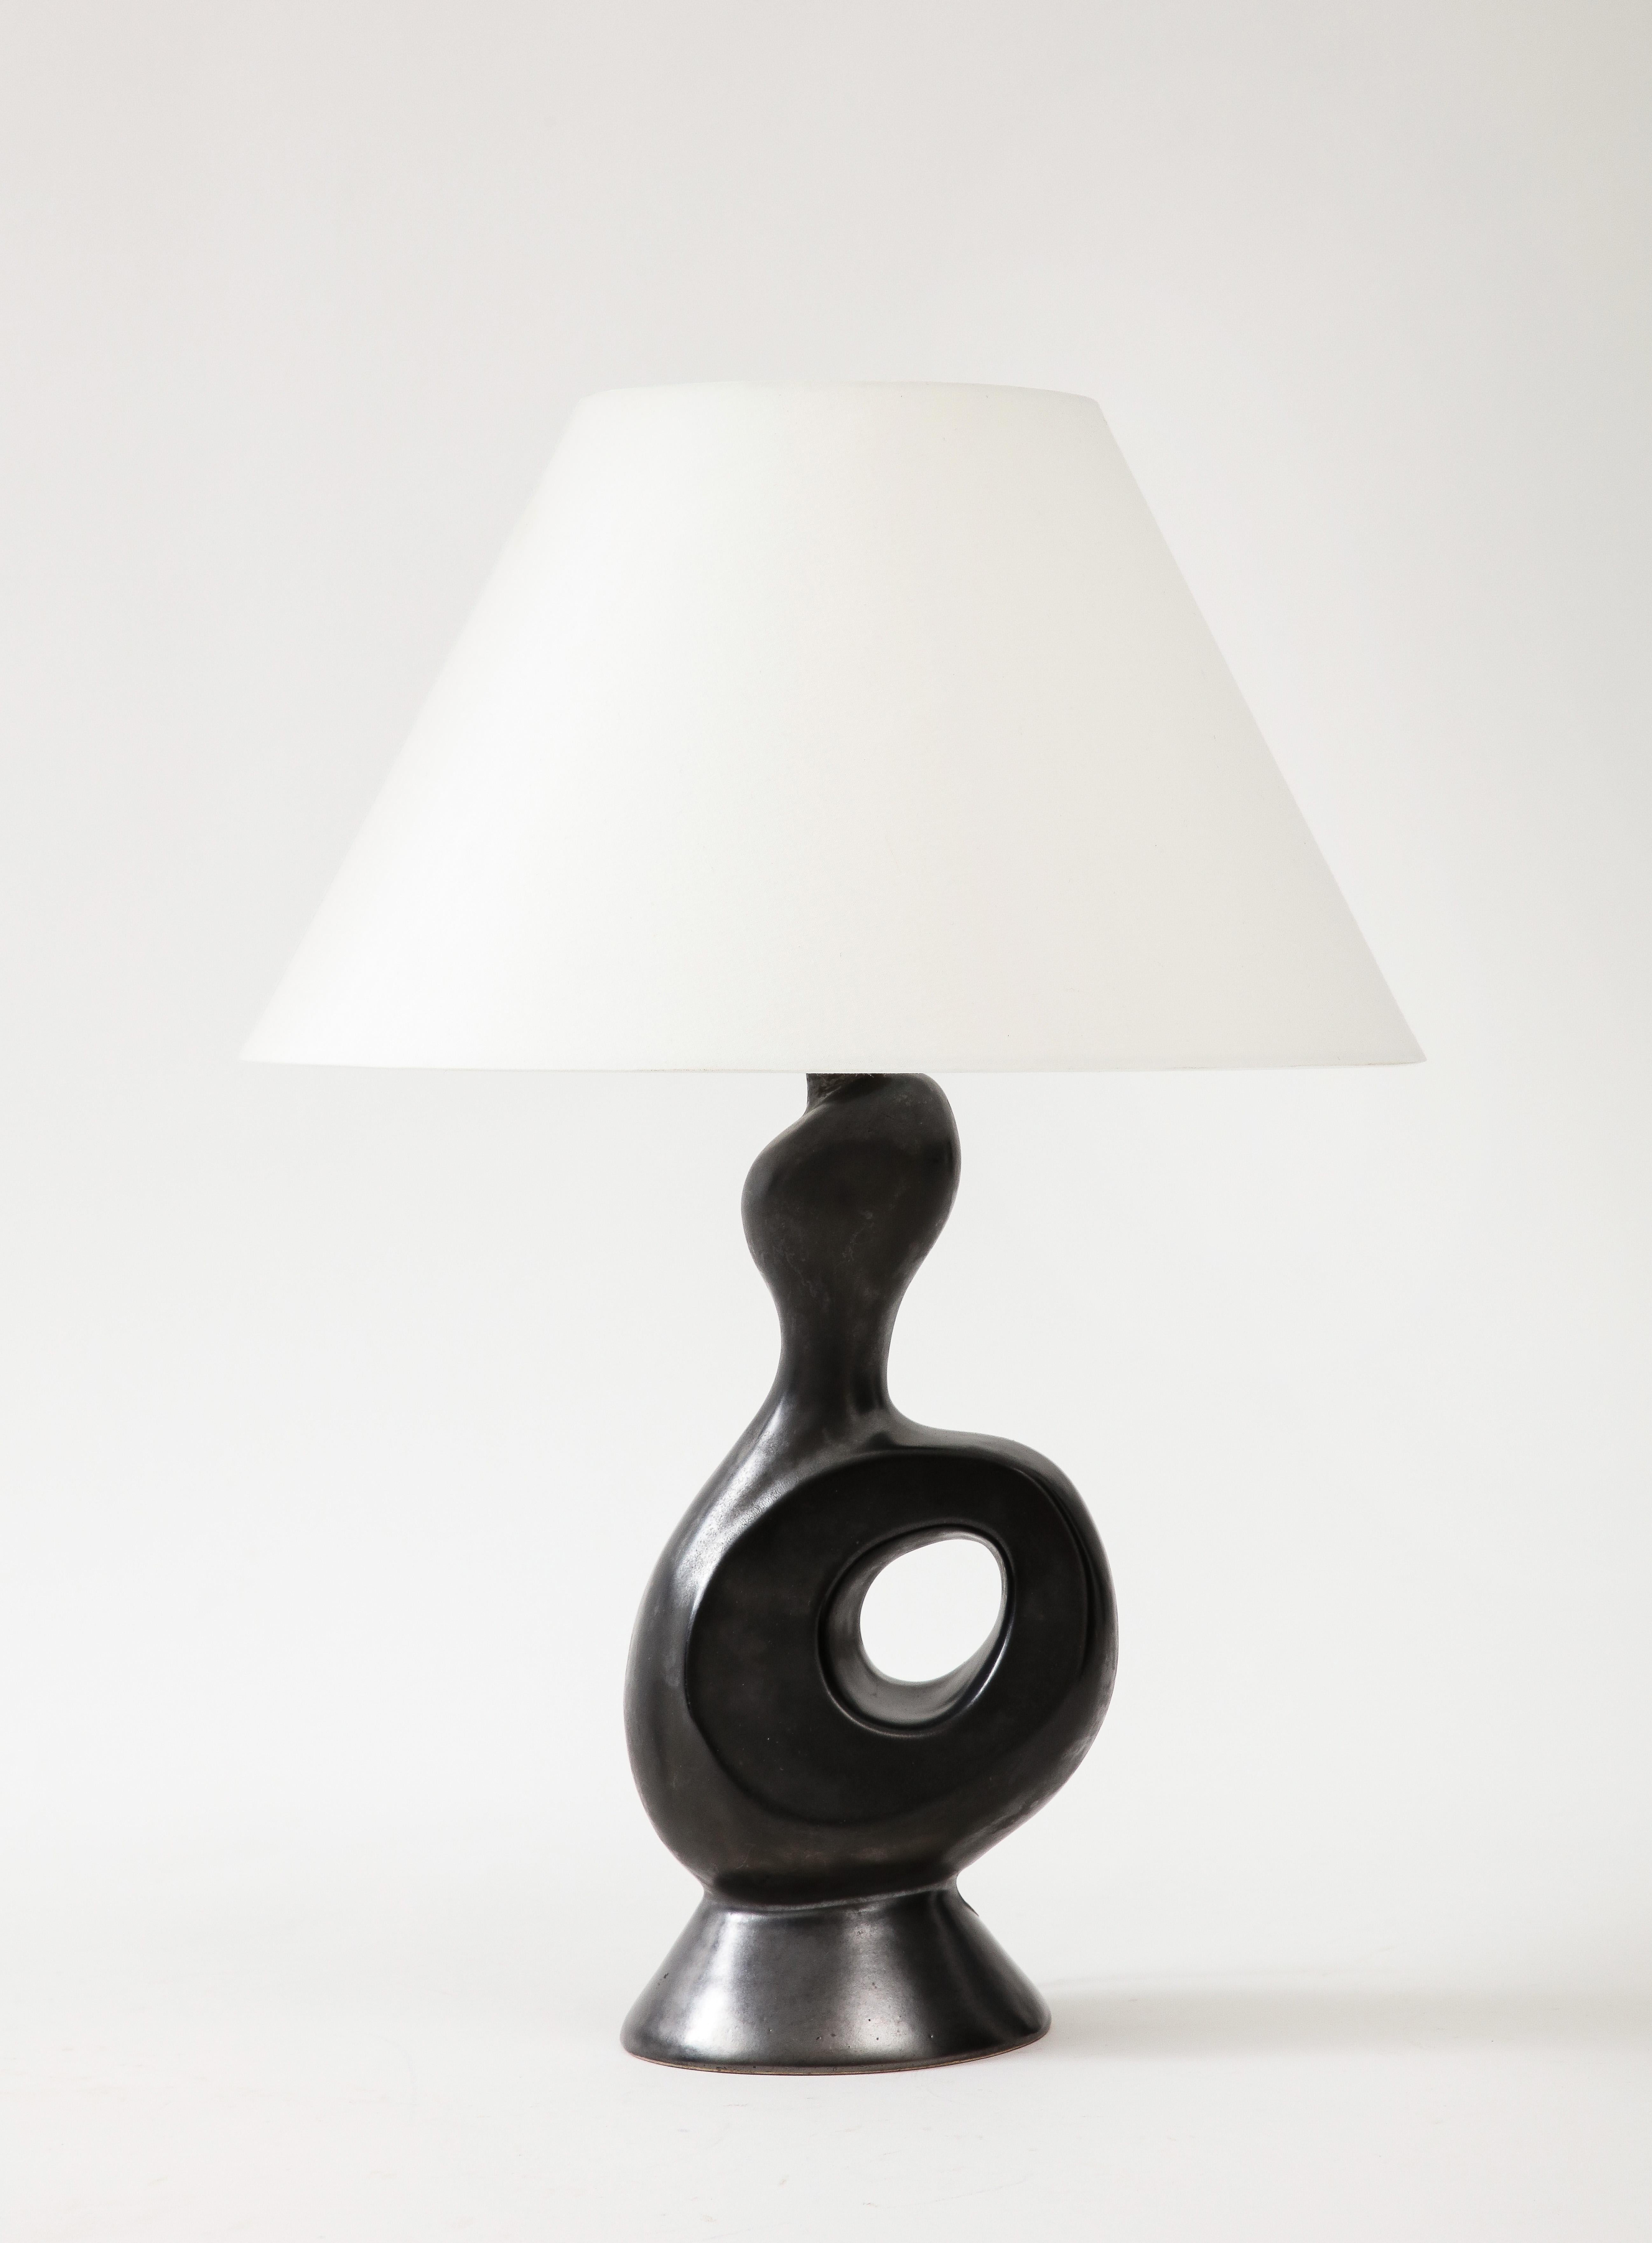 Gil Angoloni, ‘Bird' Black Glazed Ceramic Lamp w/ Parchment Shade. France, c. 1950, signed

Orleans Earthenware, France

Since listed:  This Lamp has been rewired to a dark brown silk twist cord with switch and a single Edison bronze socket.  A